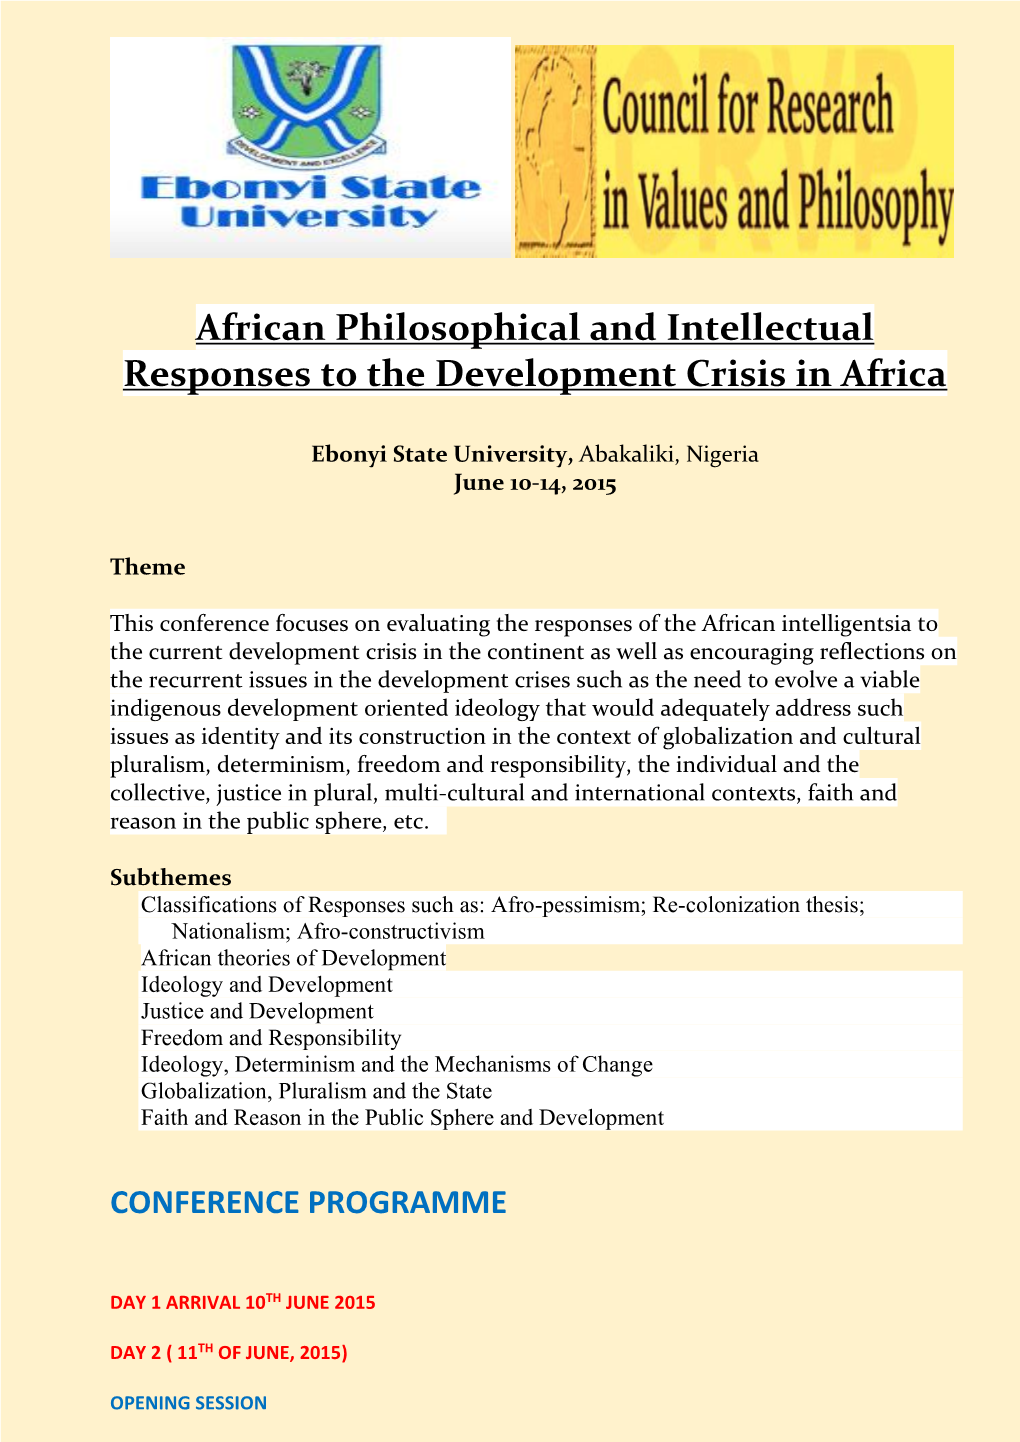 African Philosophical and Intellectual Responses to the Development Crisis in Africa